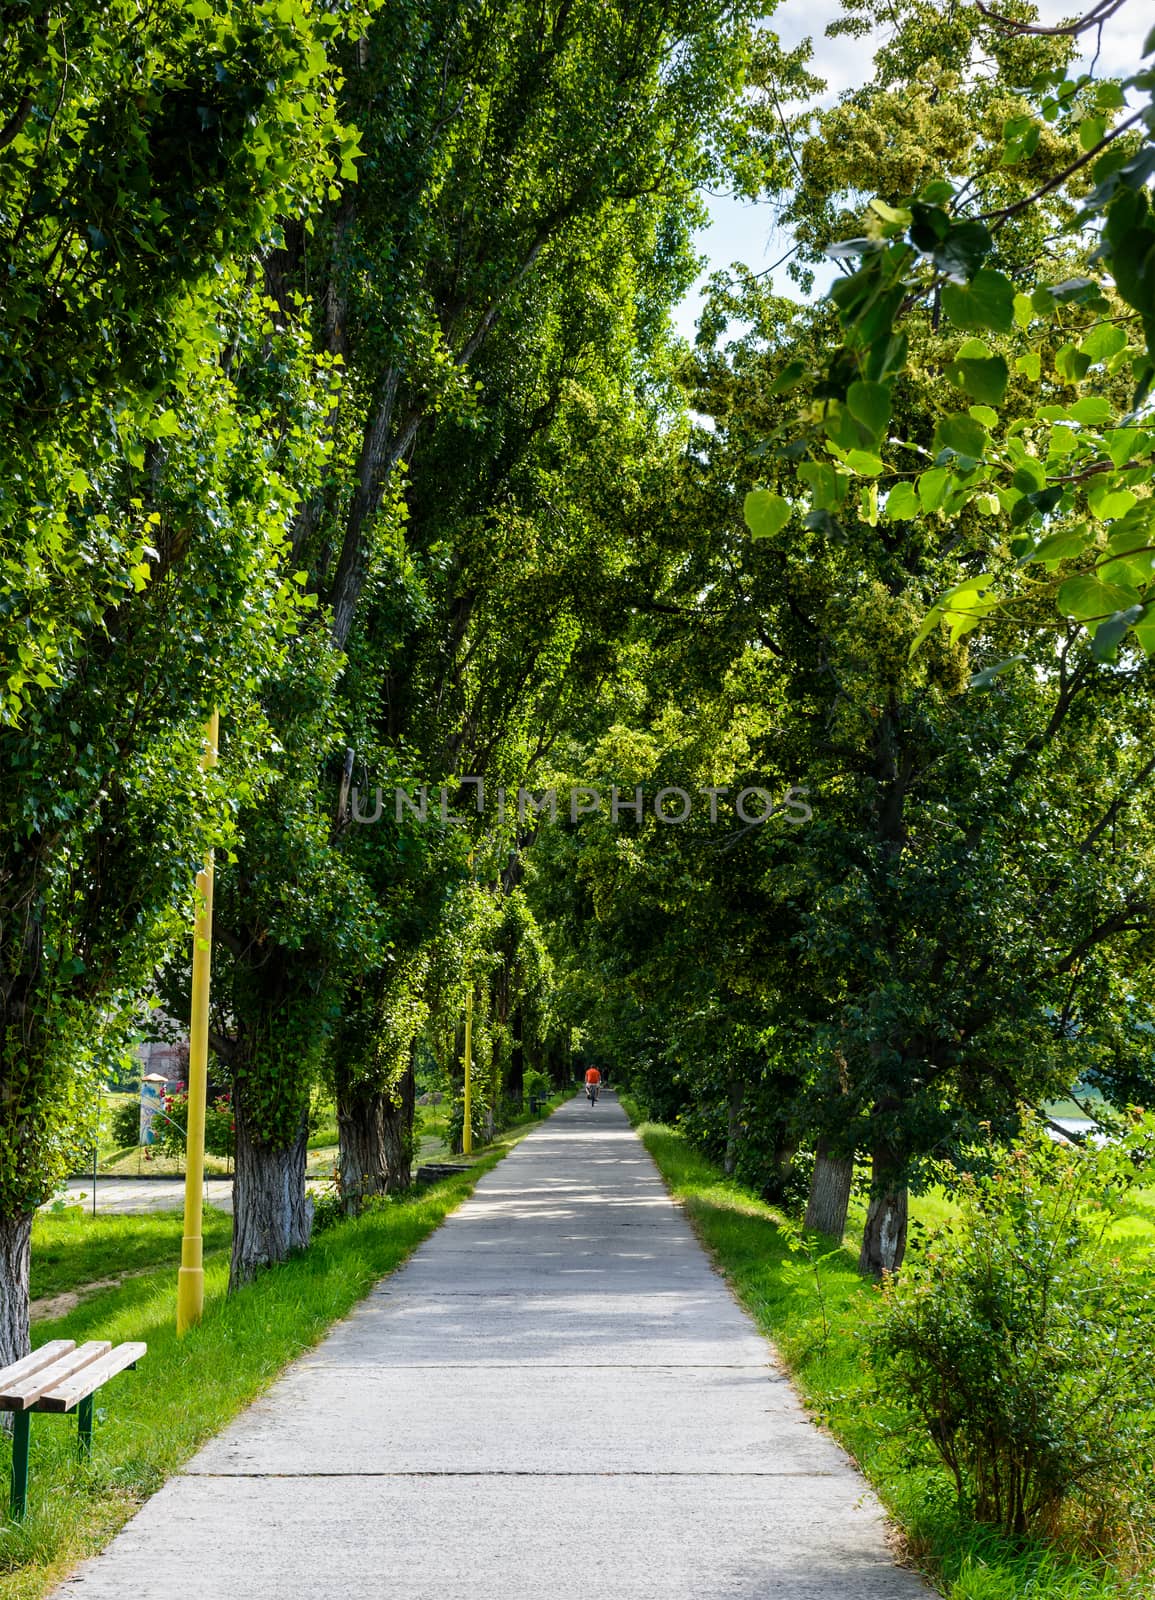 walking path under the Linden tree crowns by Pellinni